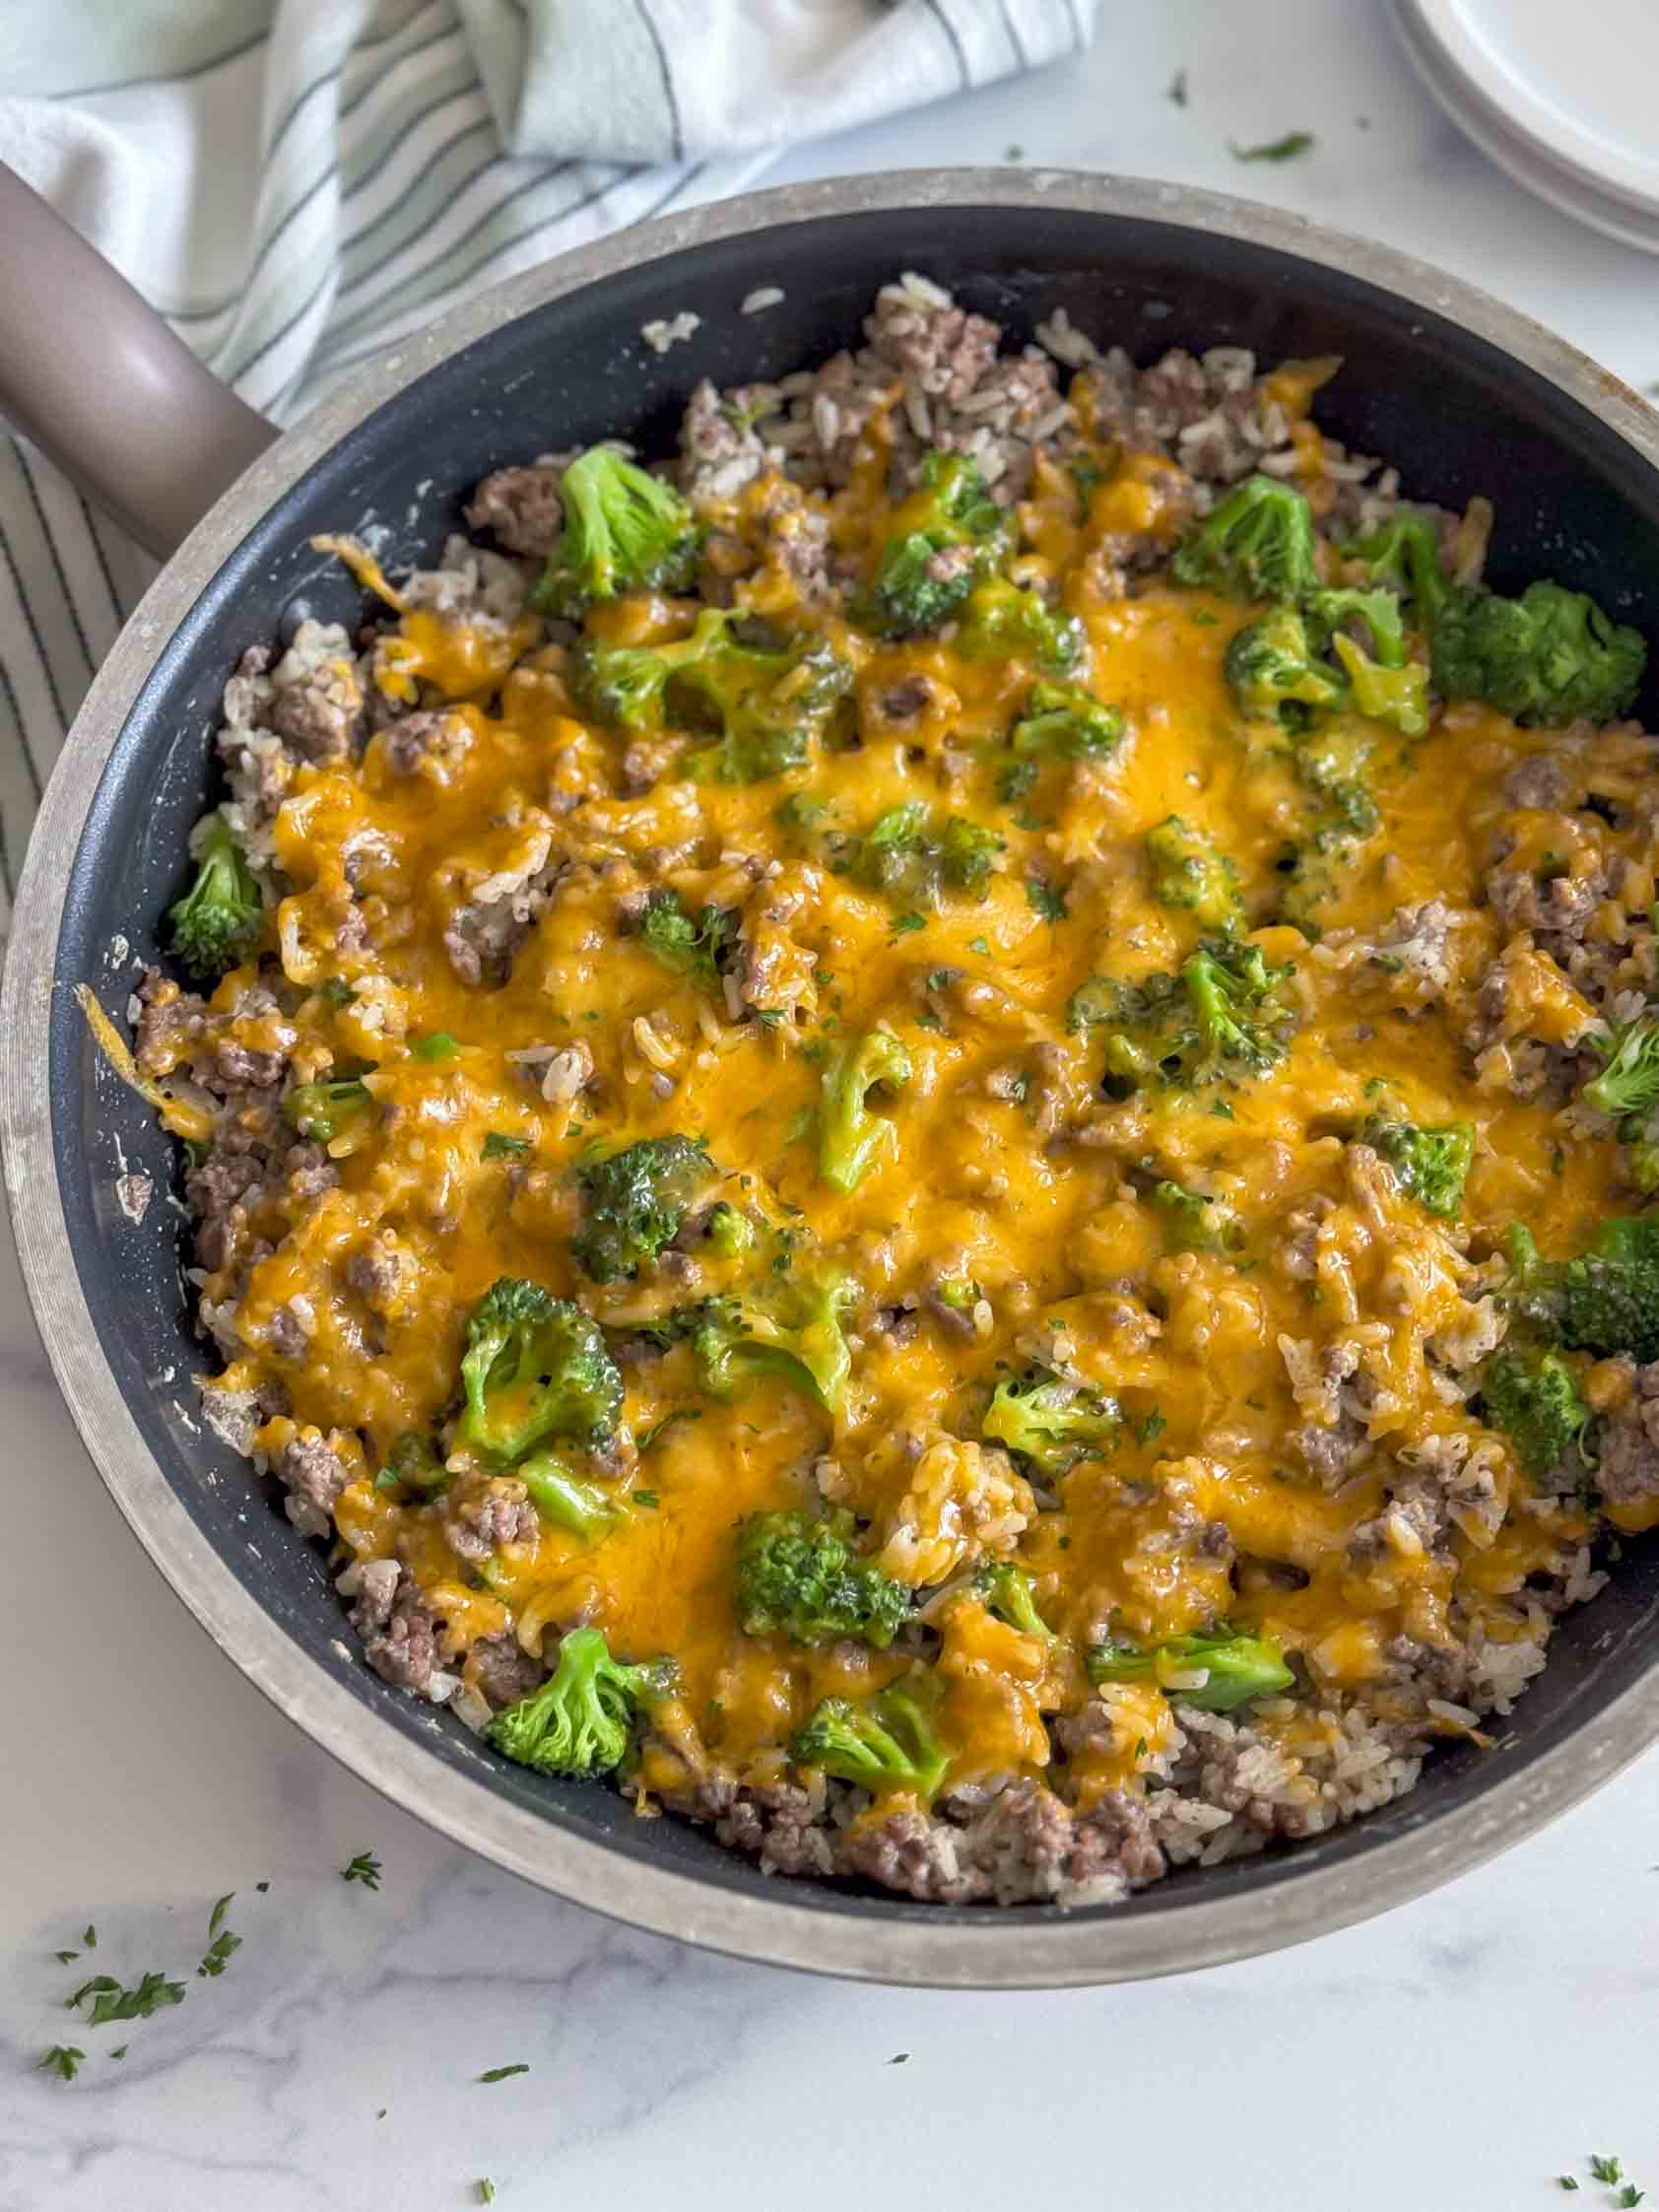 Skillet filled with cheesy ranch ground beef and rice.